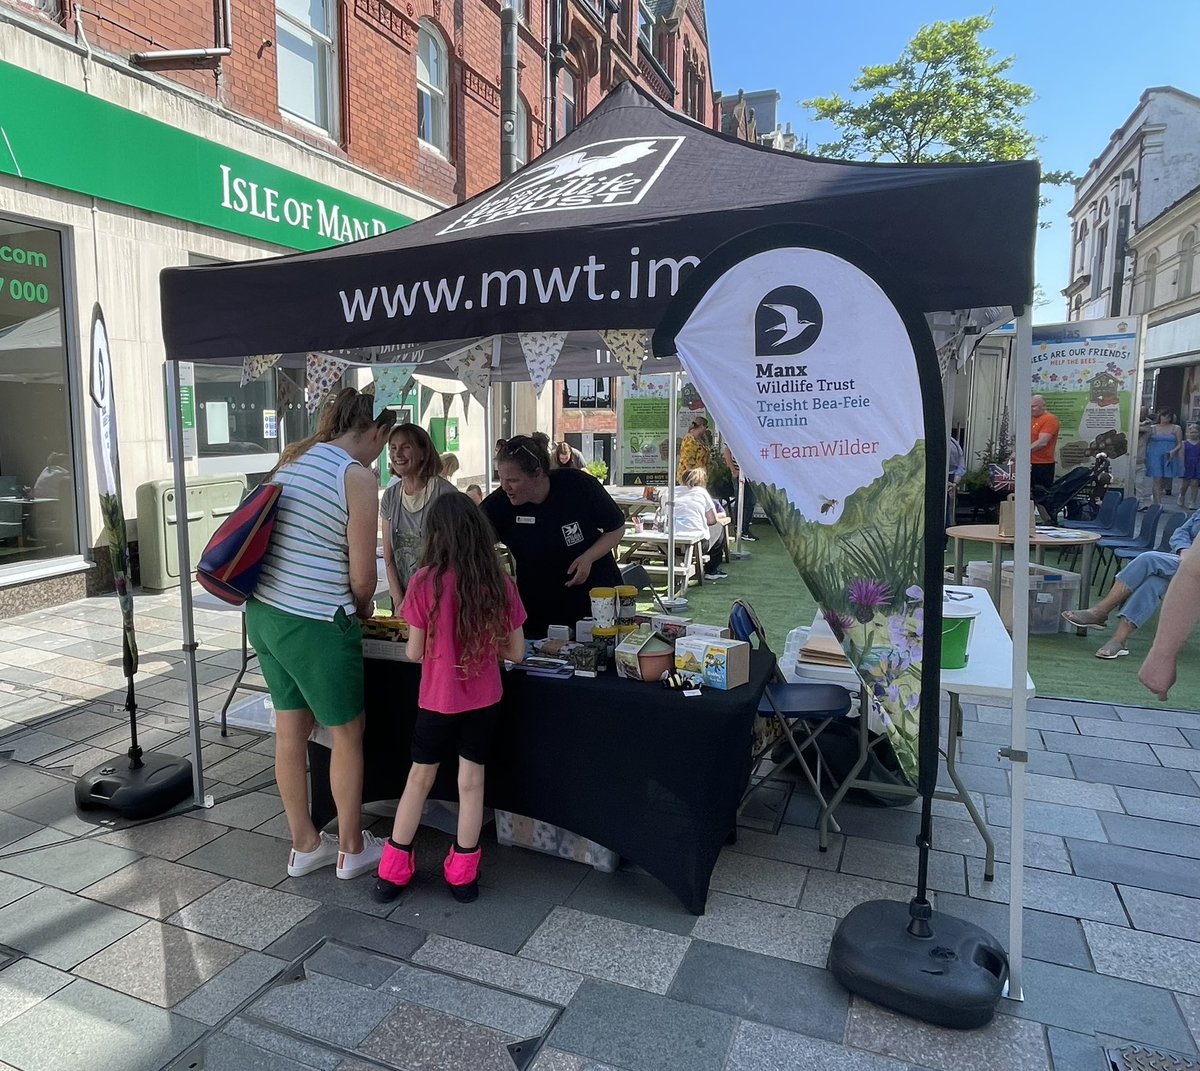 We have a @manxnature stand in Strand Street today for #DouglasBeeDay Thanks to Graham and @DouglasCityC team for inviting us along! #teamwilder #manxnature #wildlifegardening 🐝🇮🇲🐝